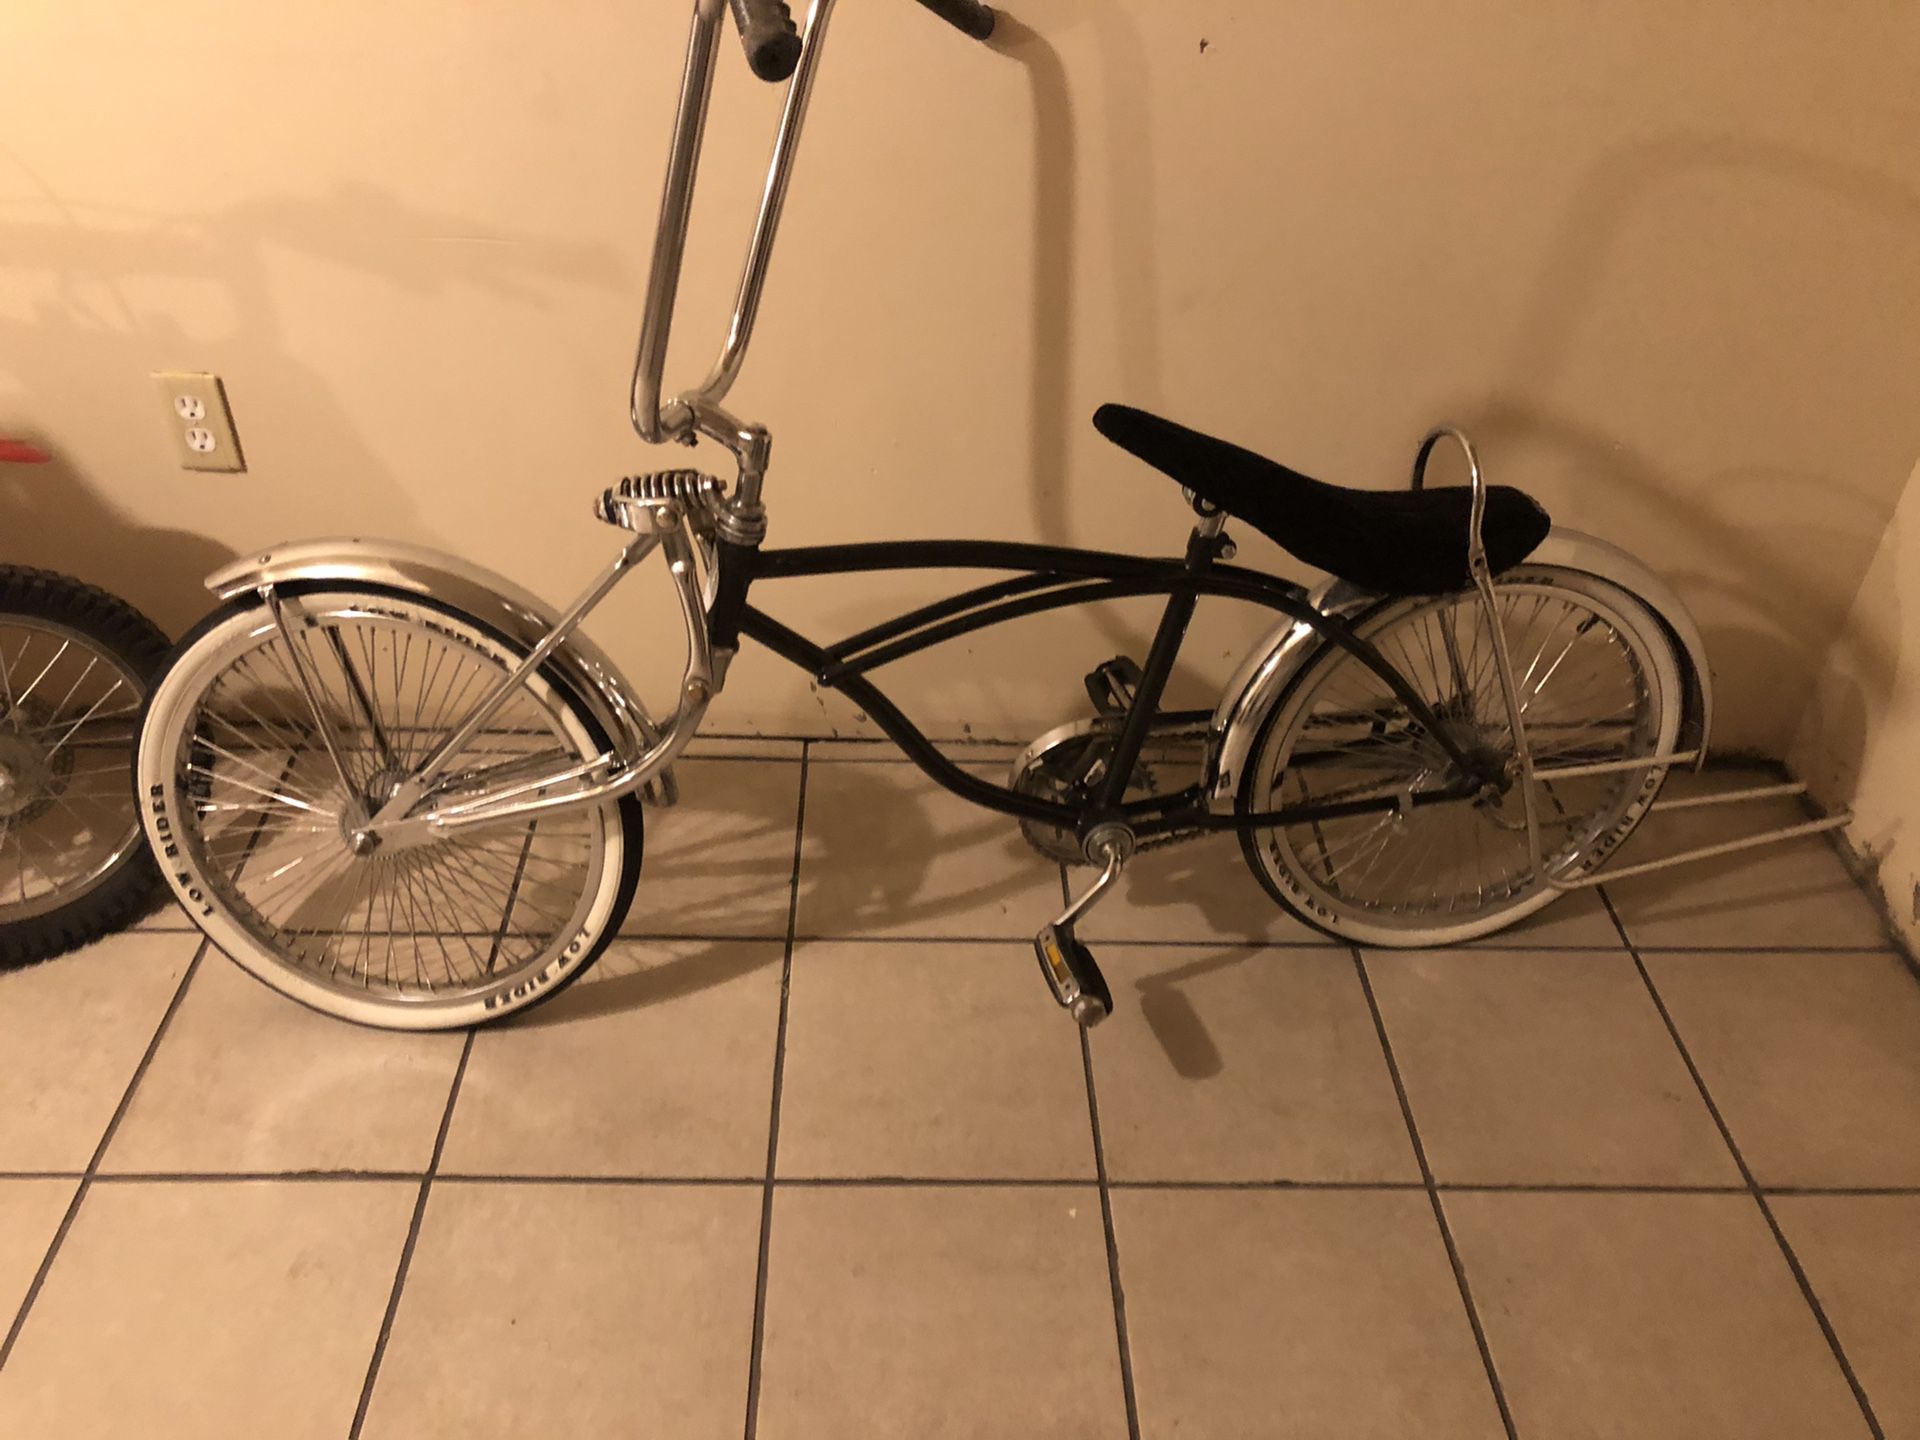 Lowrider bicycle